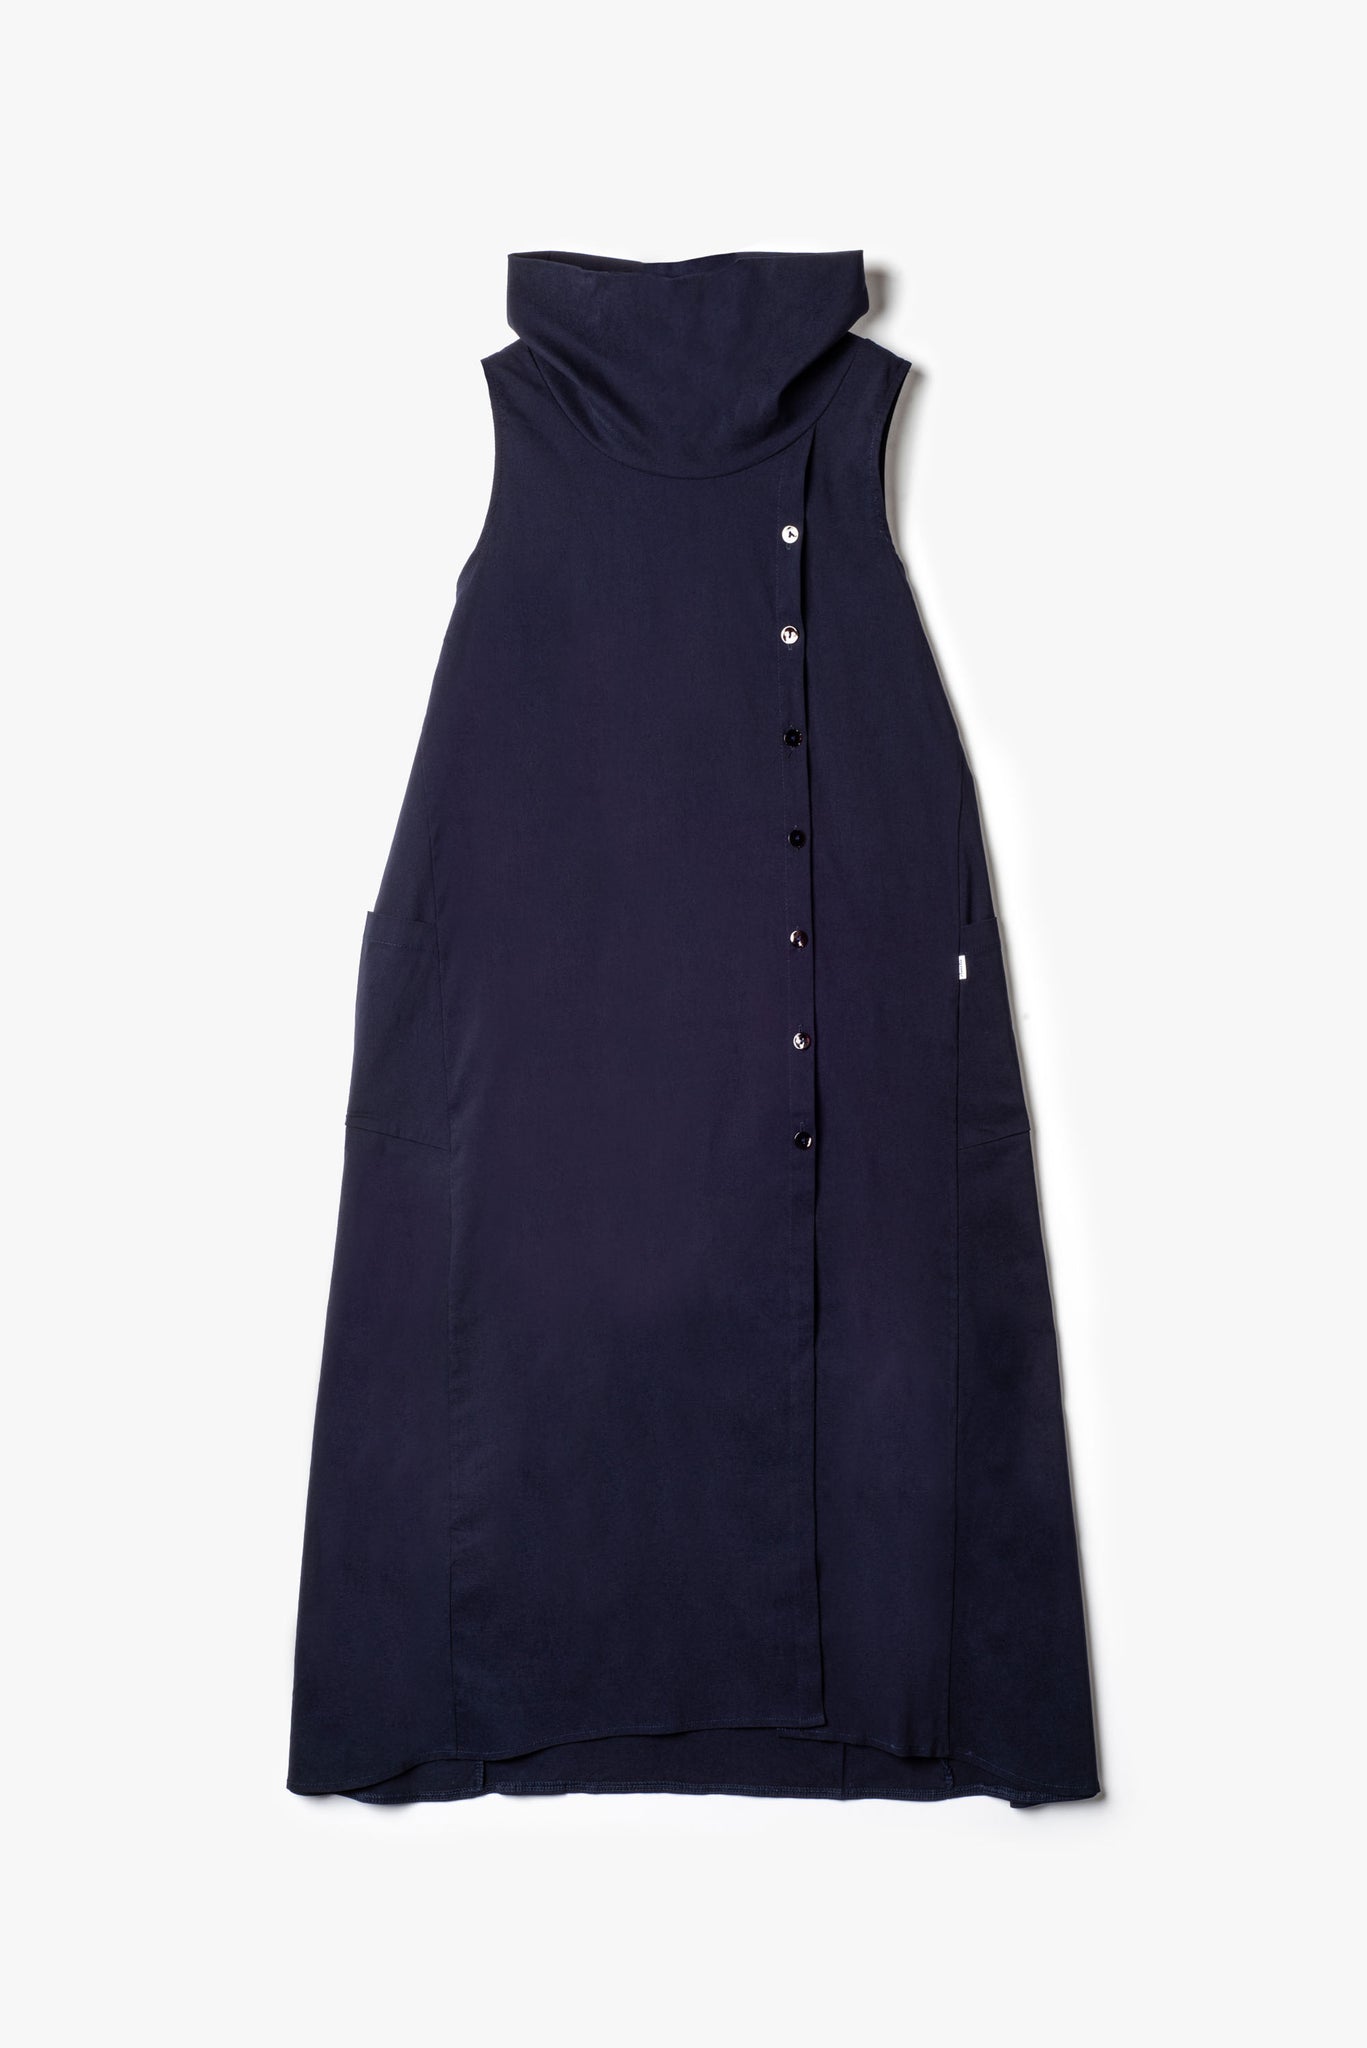 Sleeveless dress with buttons